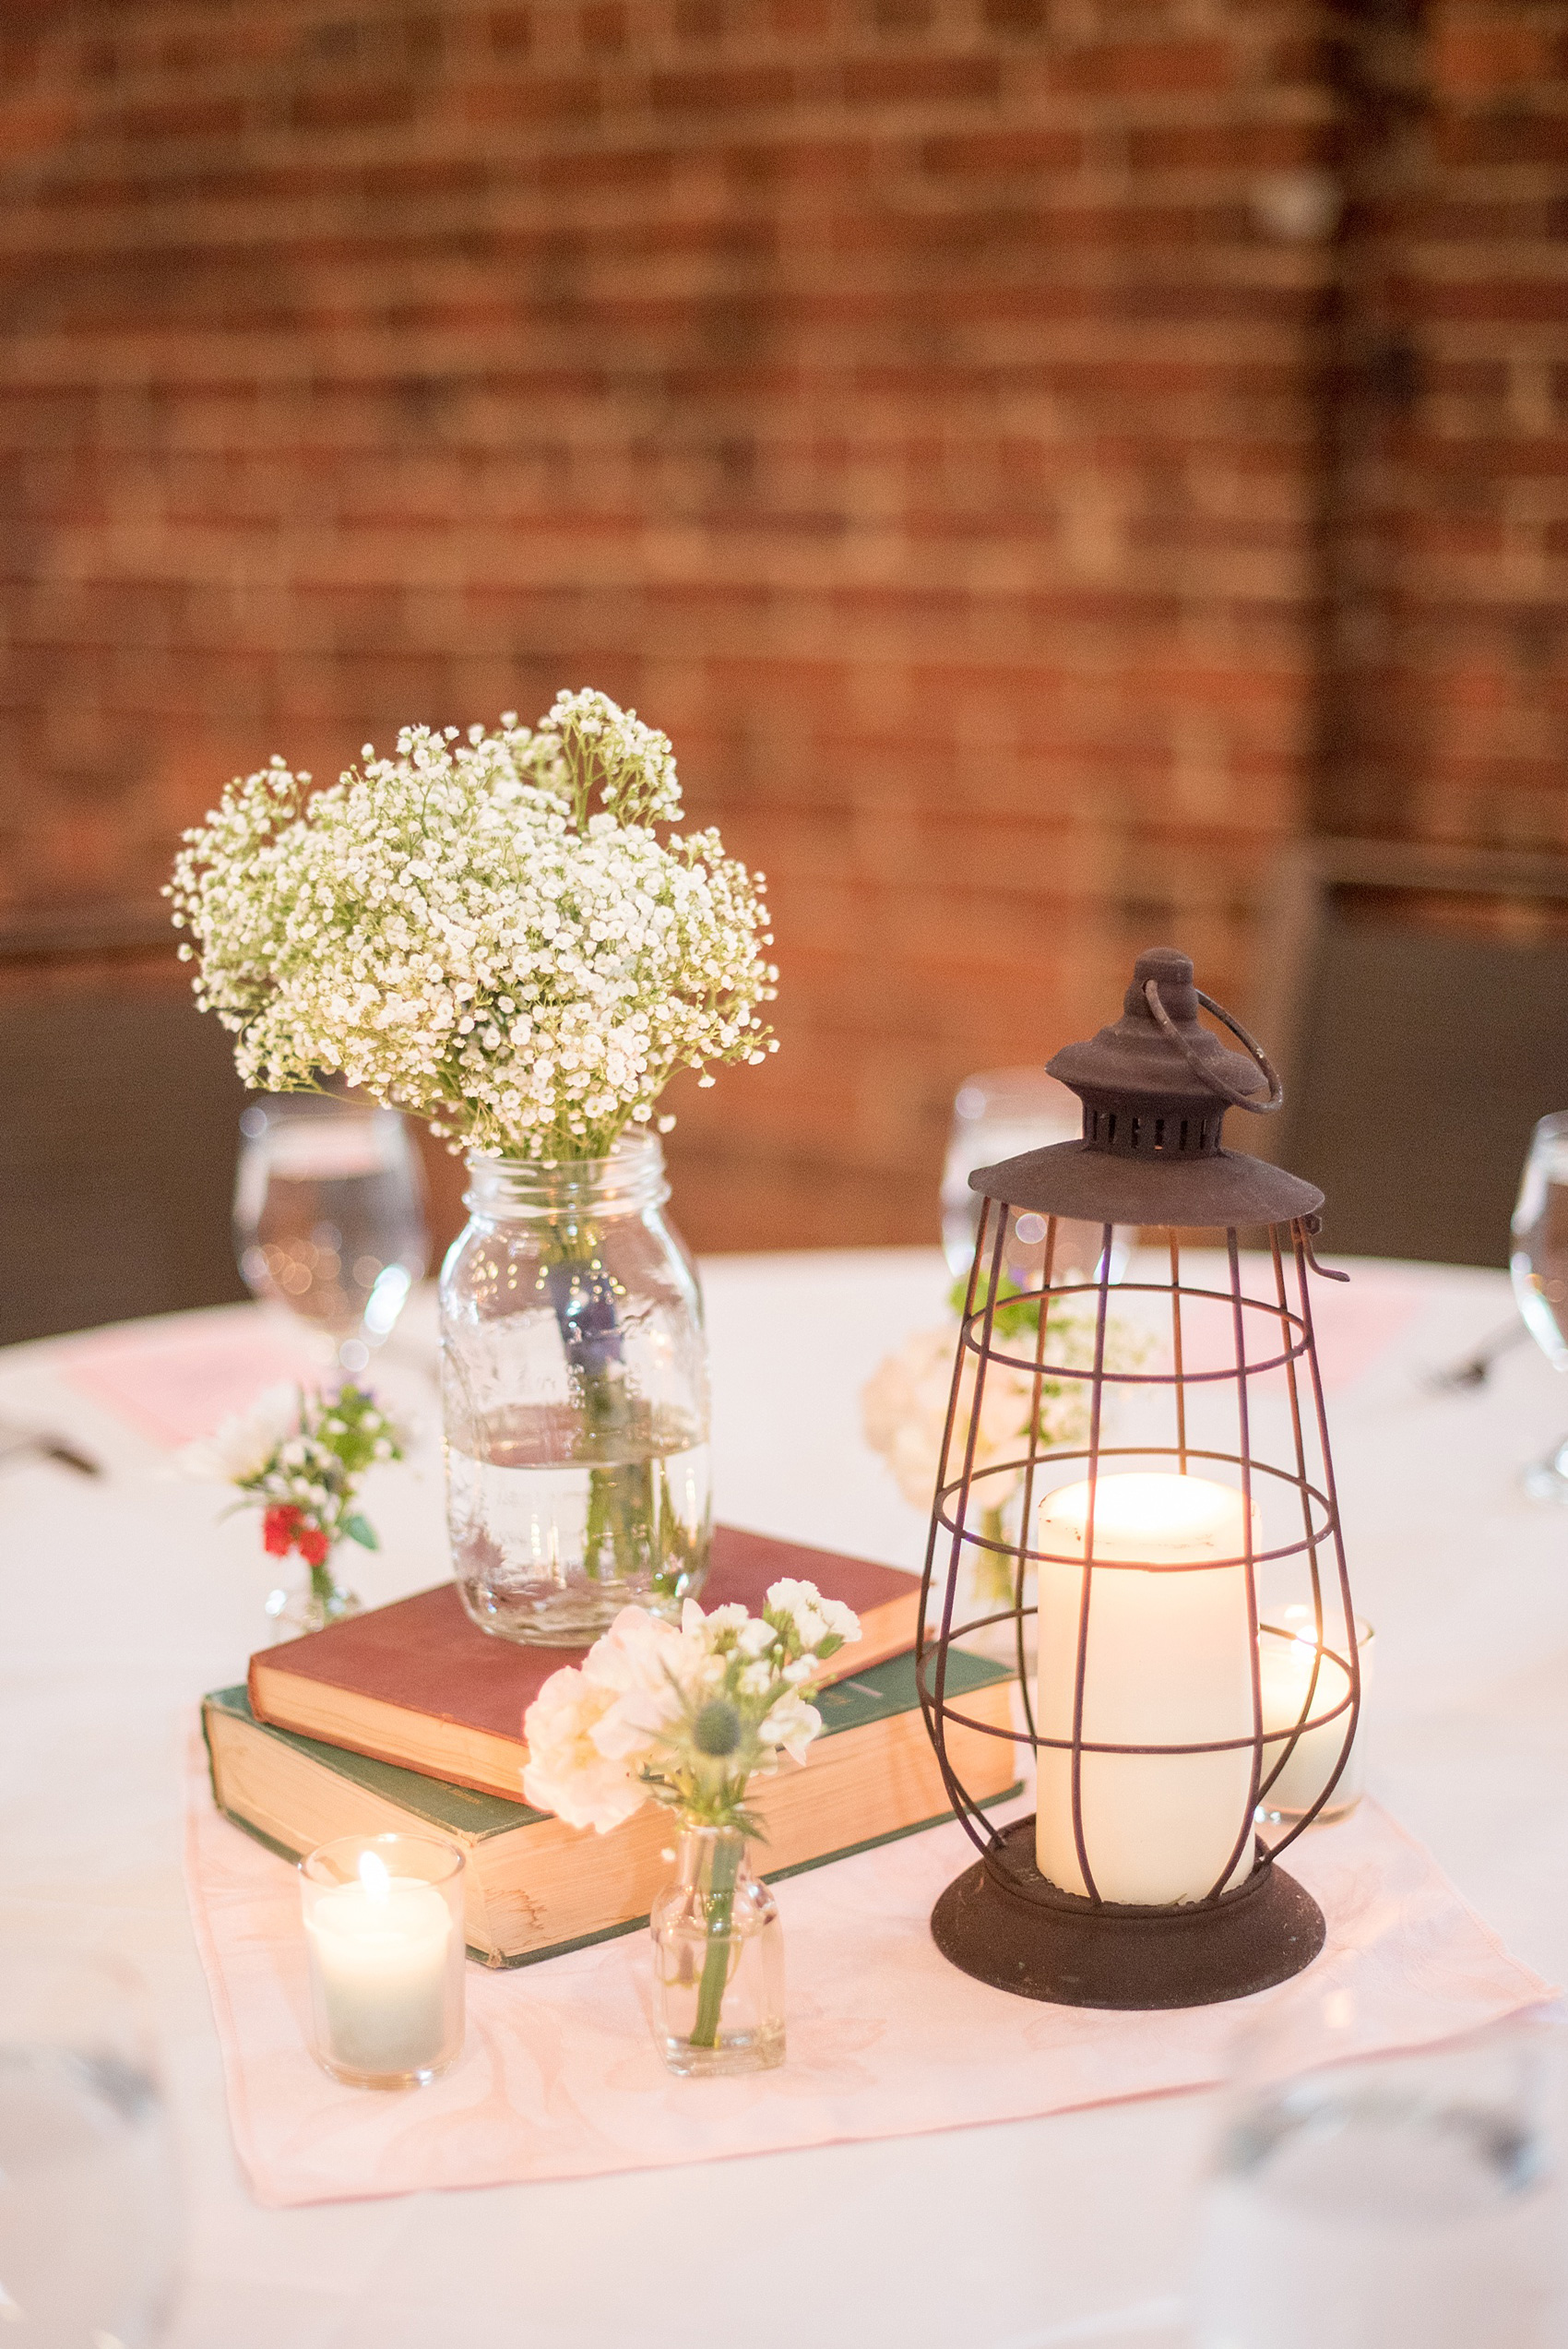 Mikkel Paige Photography photo of a Top of the Hill reception in Chapel Hill, NC. A photo of the centerpieces including lanterns, candlelight, books and flowers.